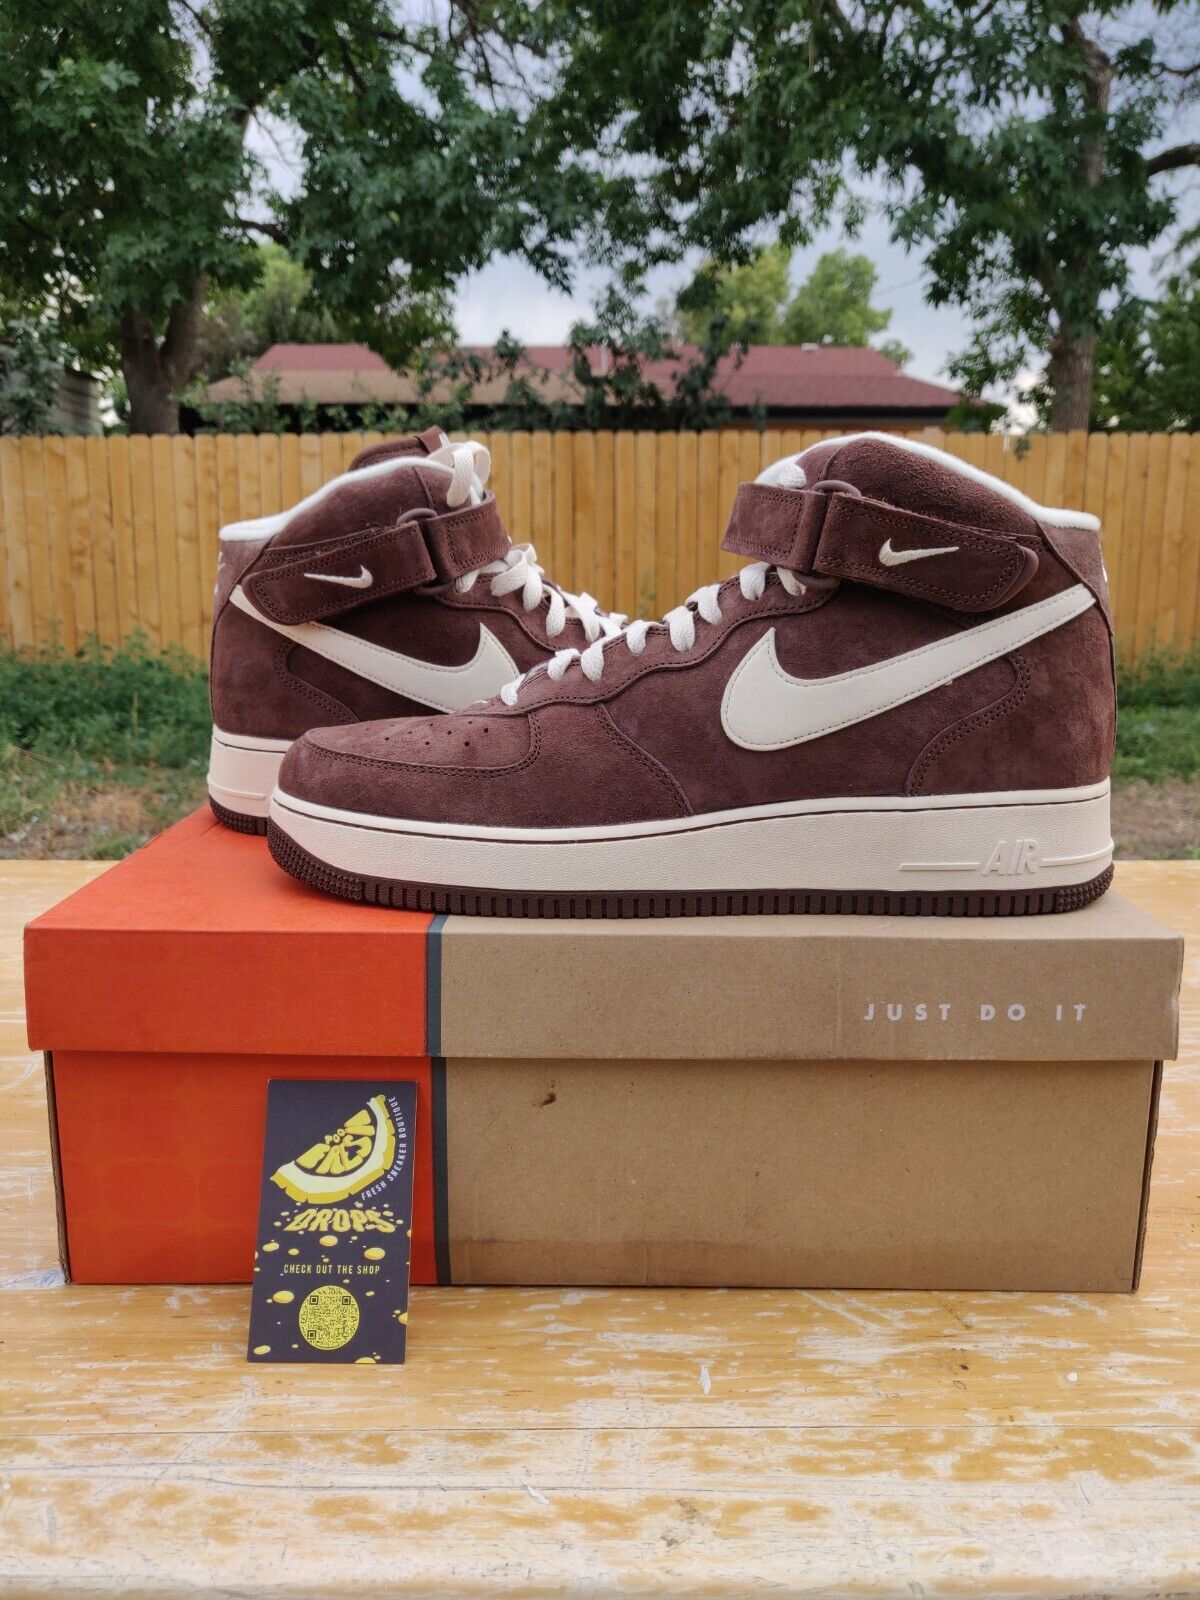 Nike Air Force 1 Mid Chocolate Cream - Brand New Size 12